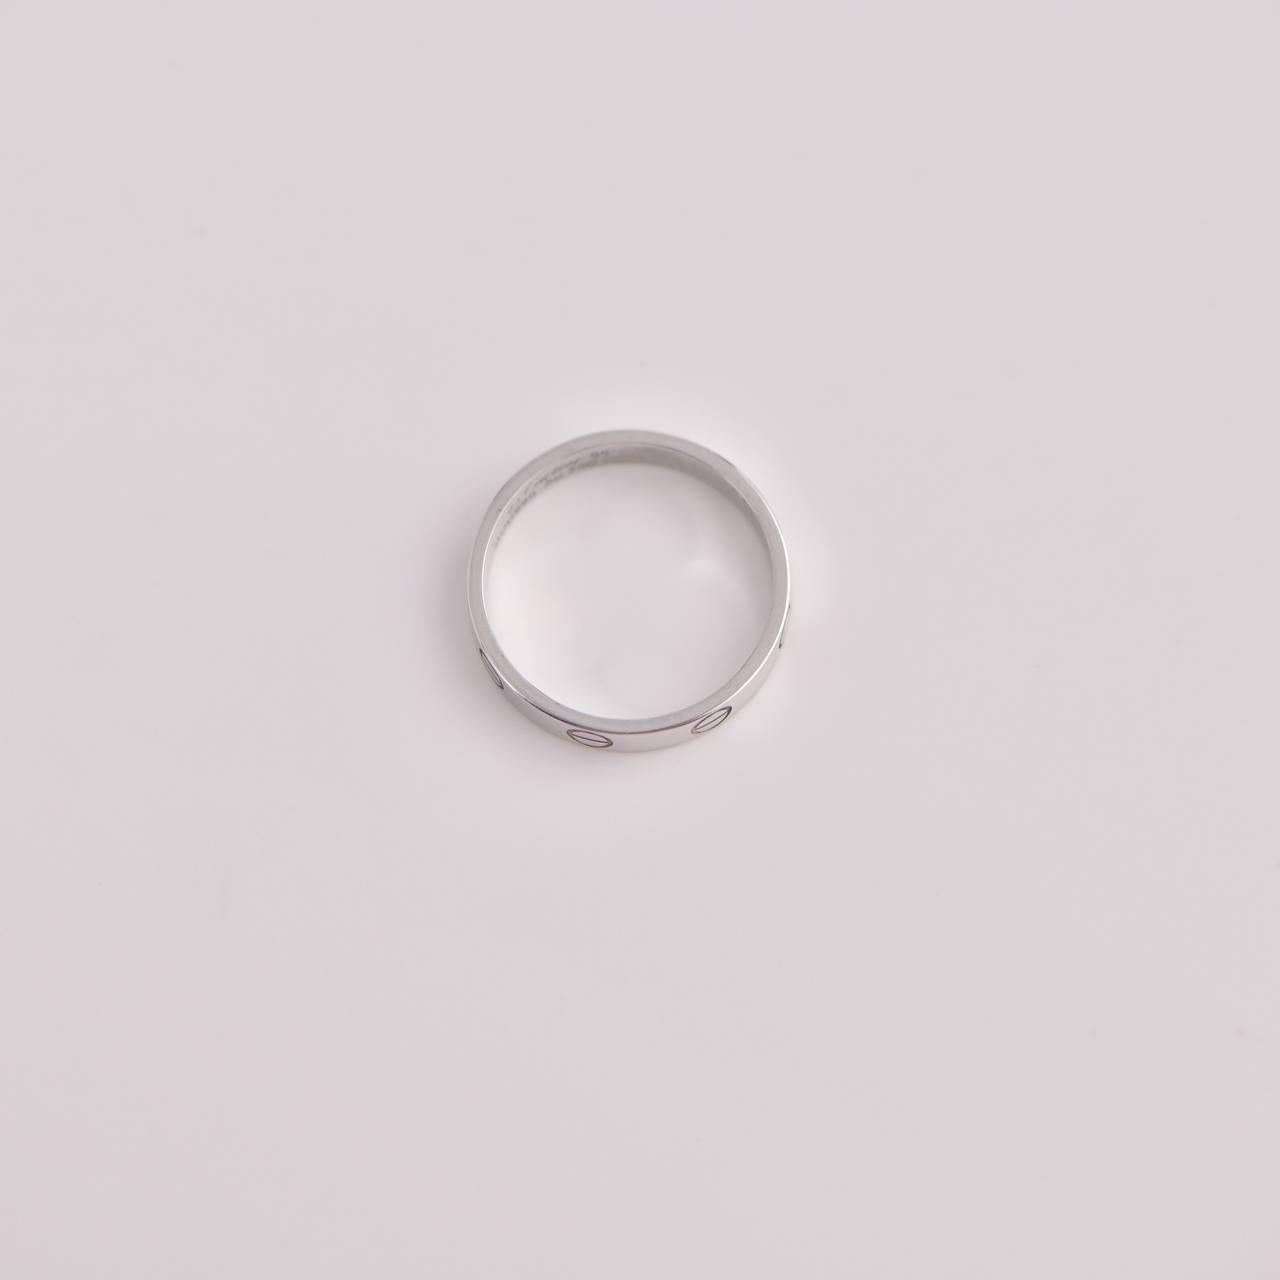 size 56 ring